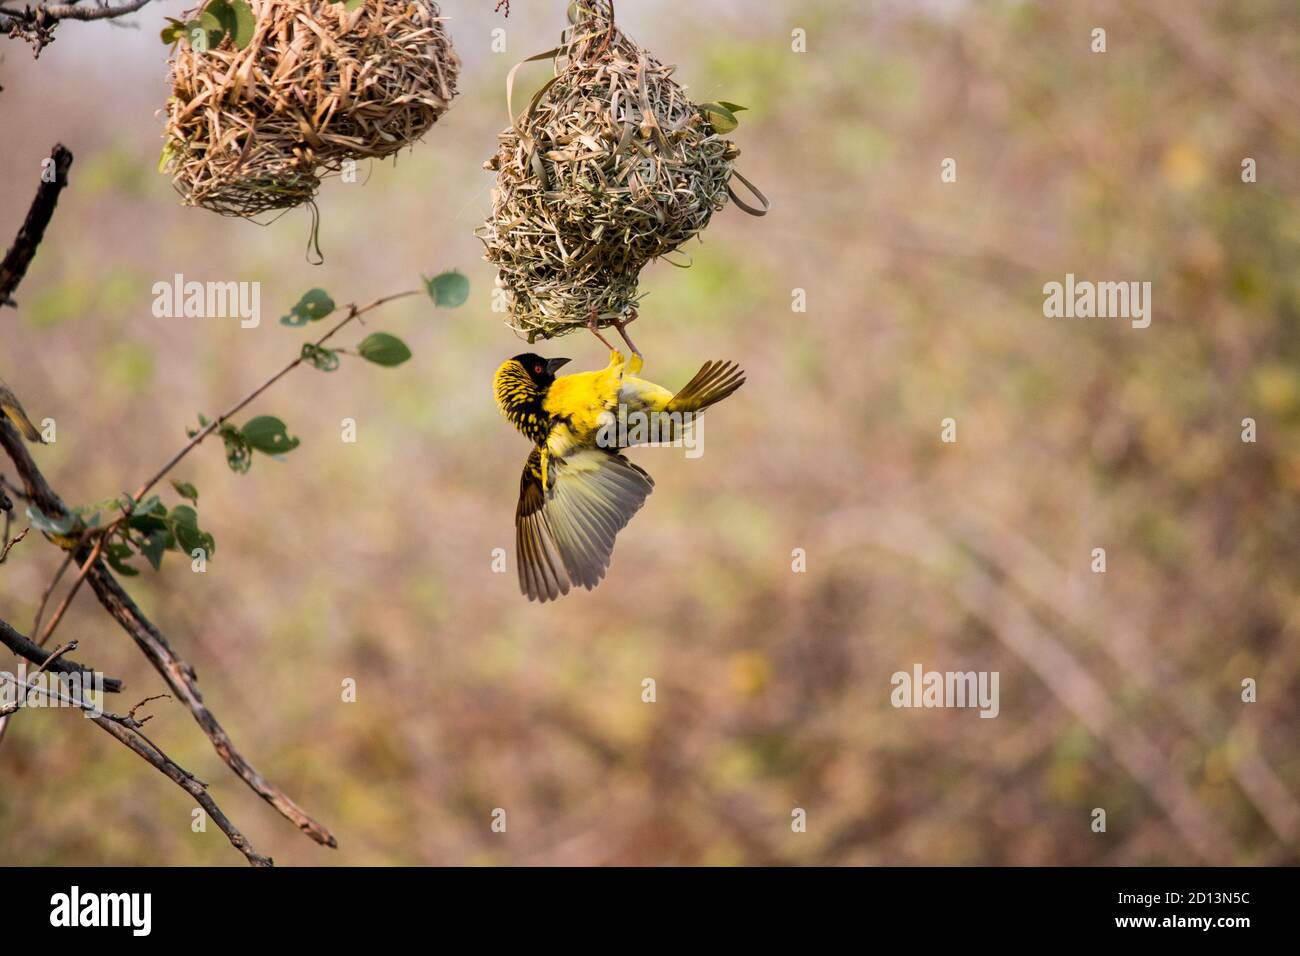 Southern masked weaver (Ploceus velatus), or African masked weaver building a grass nest mid flight Stock Photo